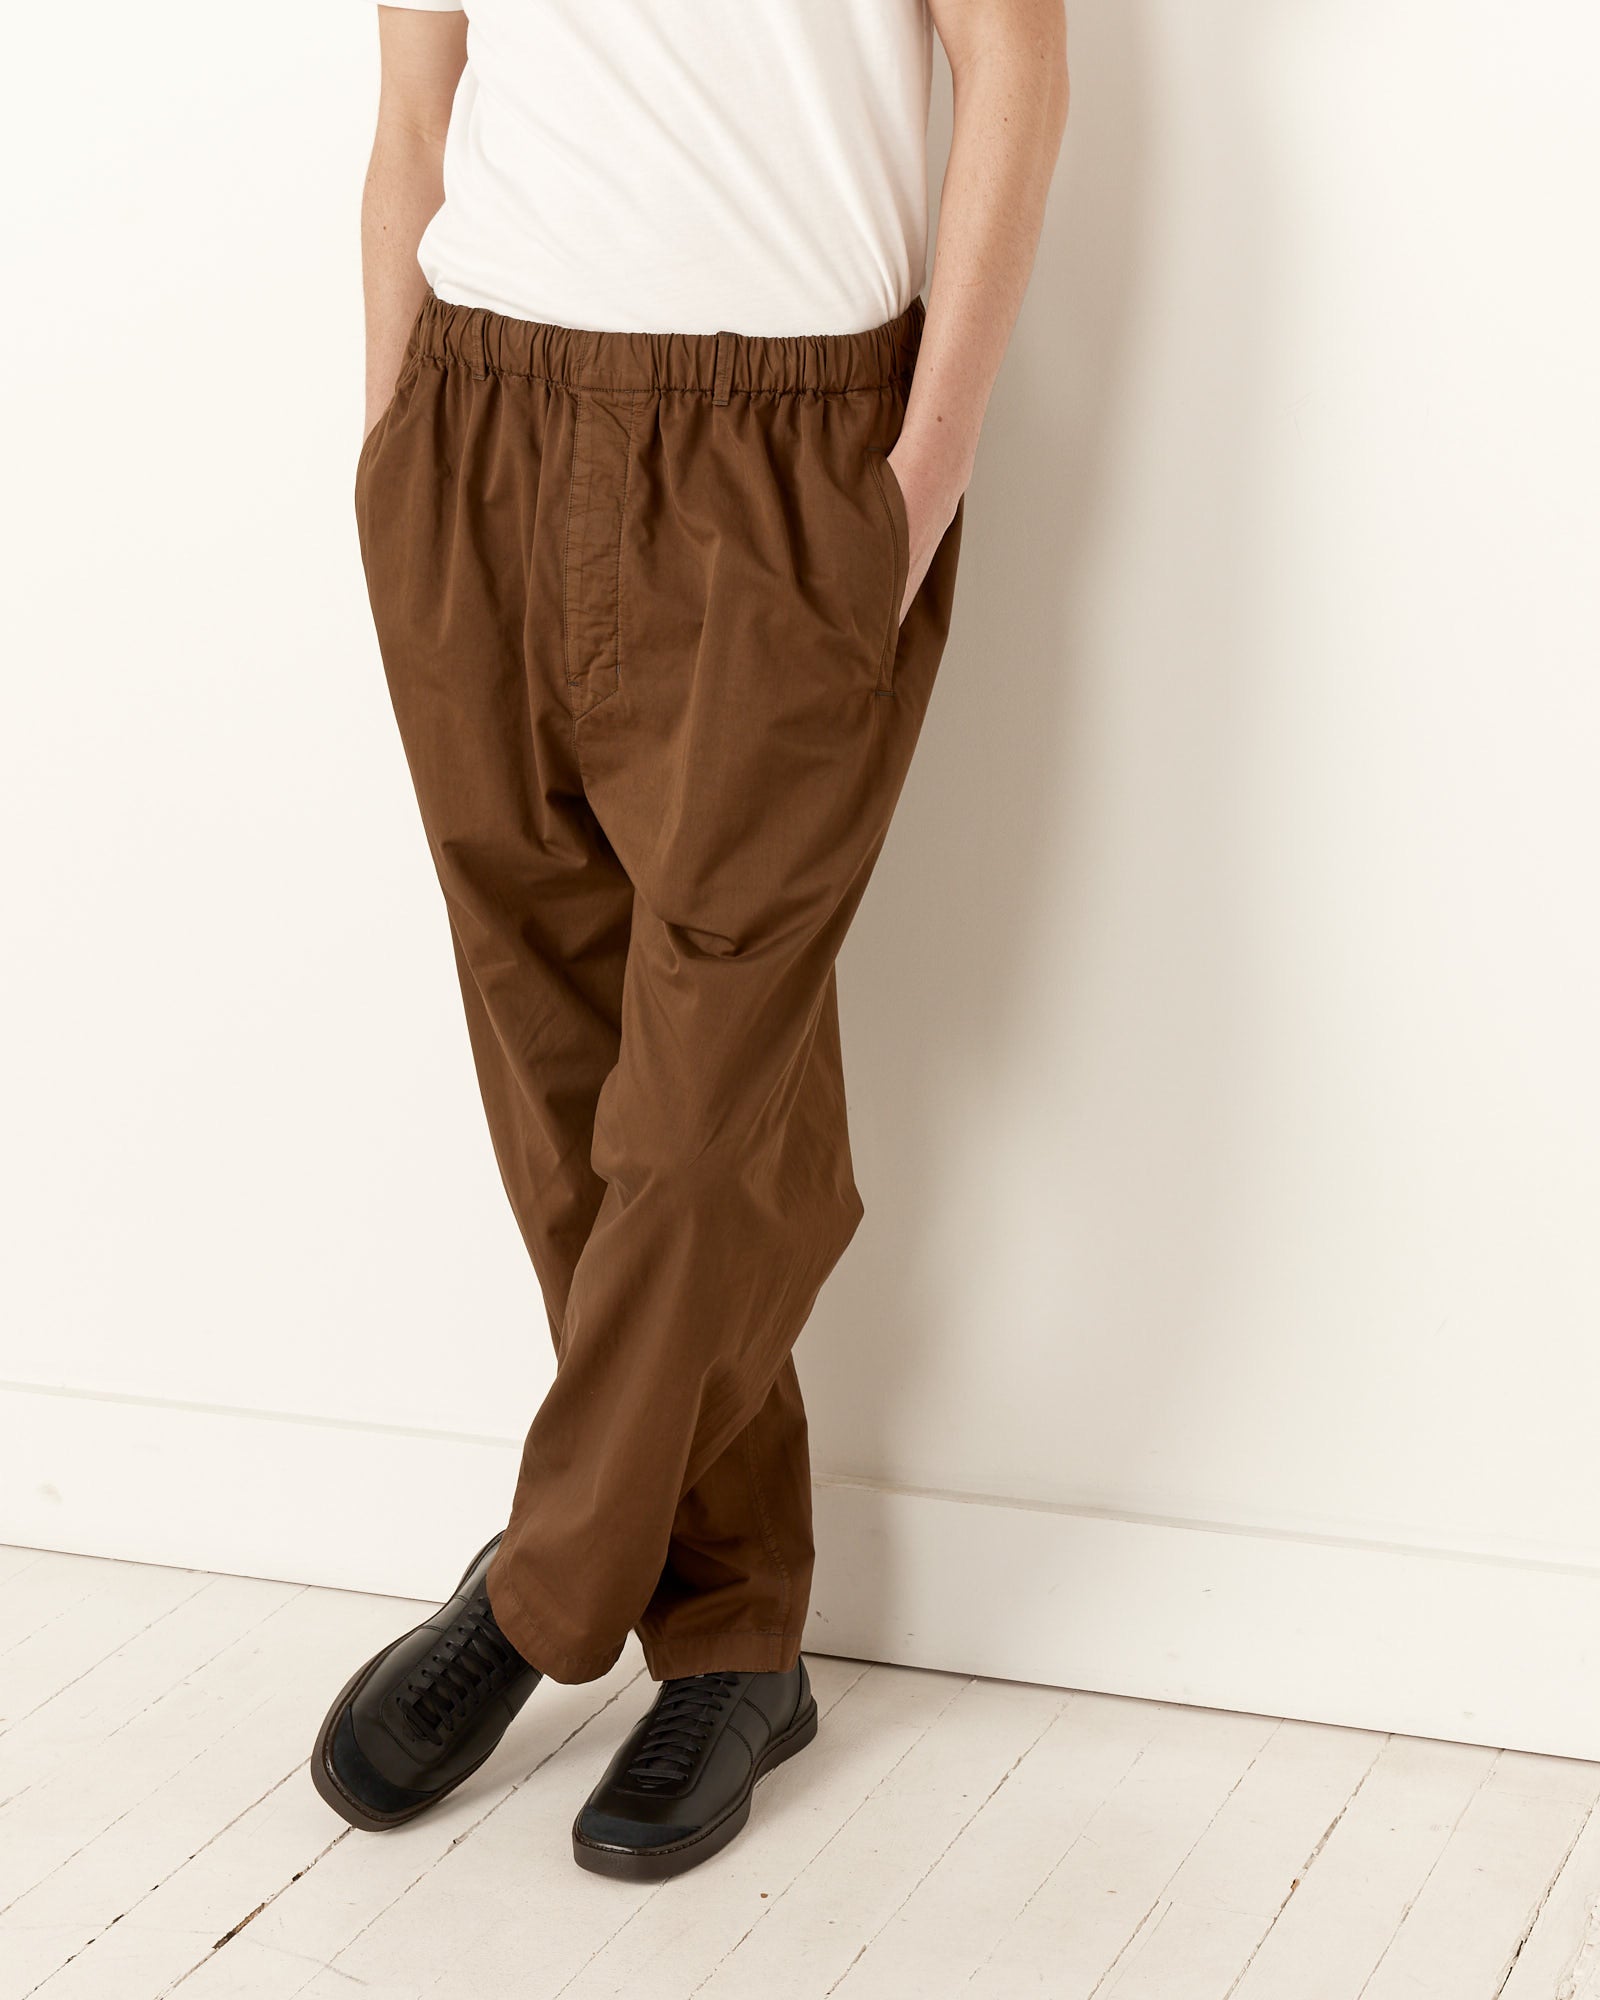 Relaxed Pants in Dark Tobacco